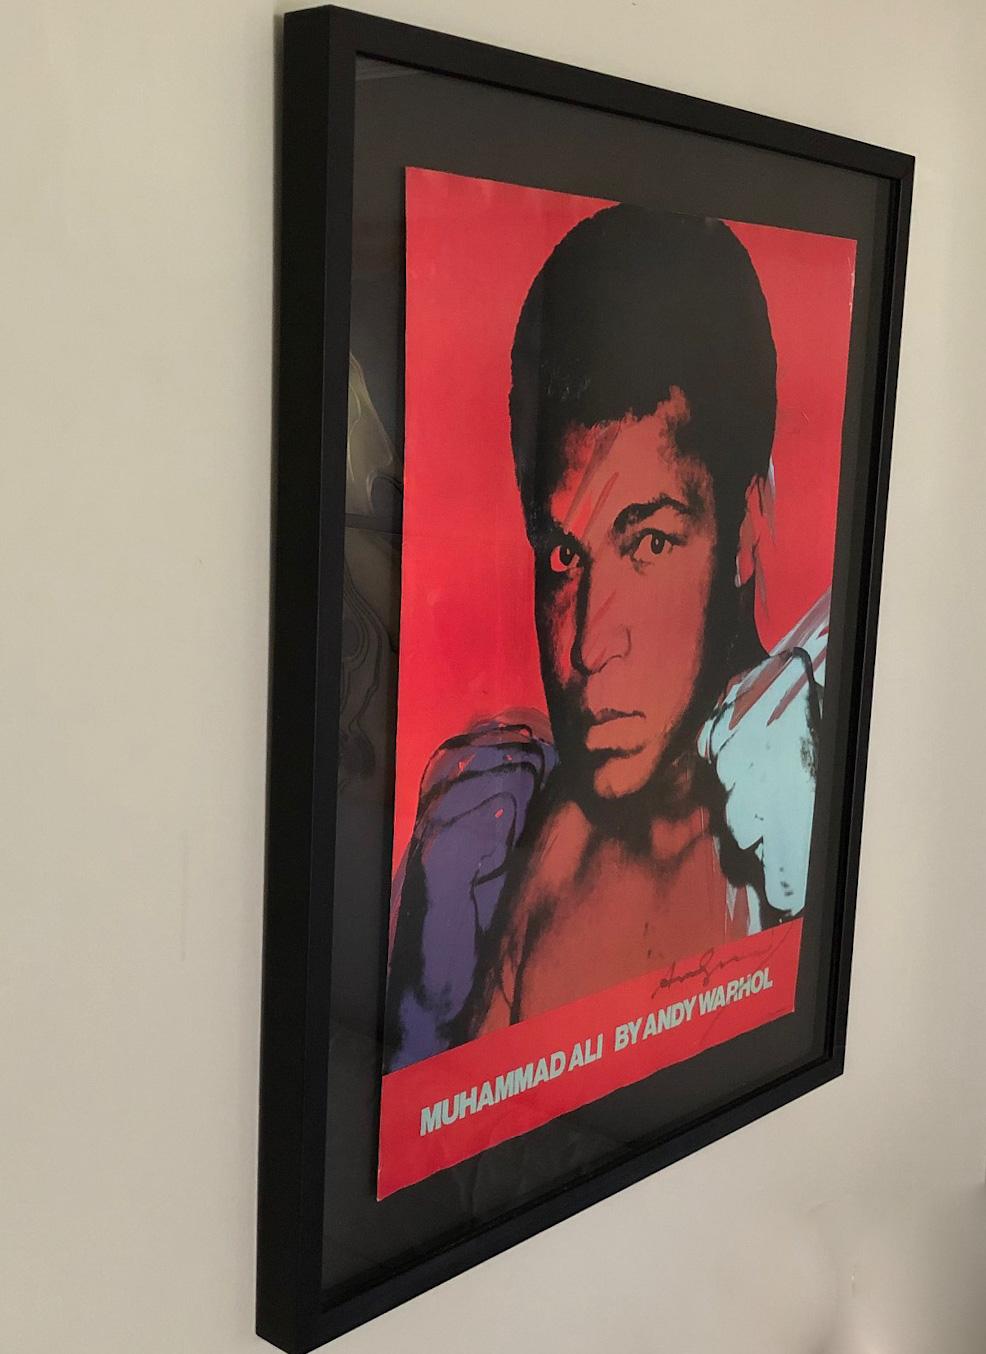 'Muhammad Ali' - Exhibition Poster - Print by (after) Andy Warhol